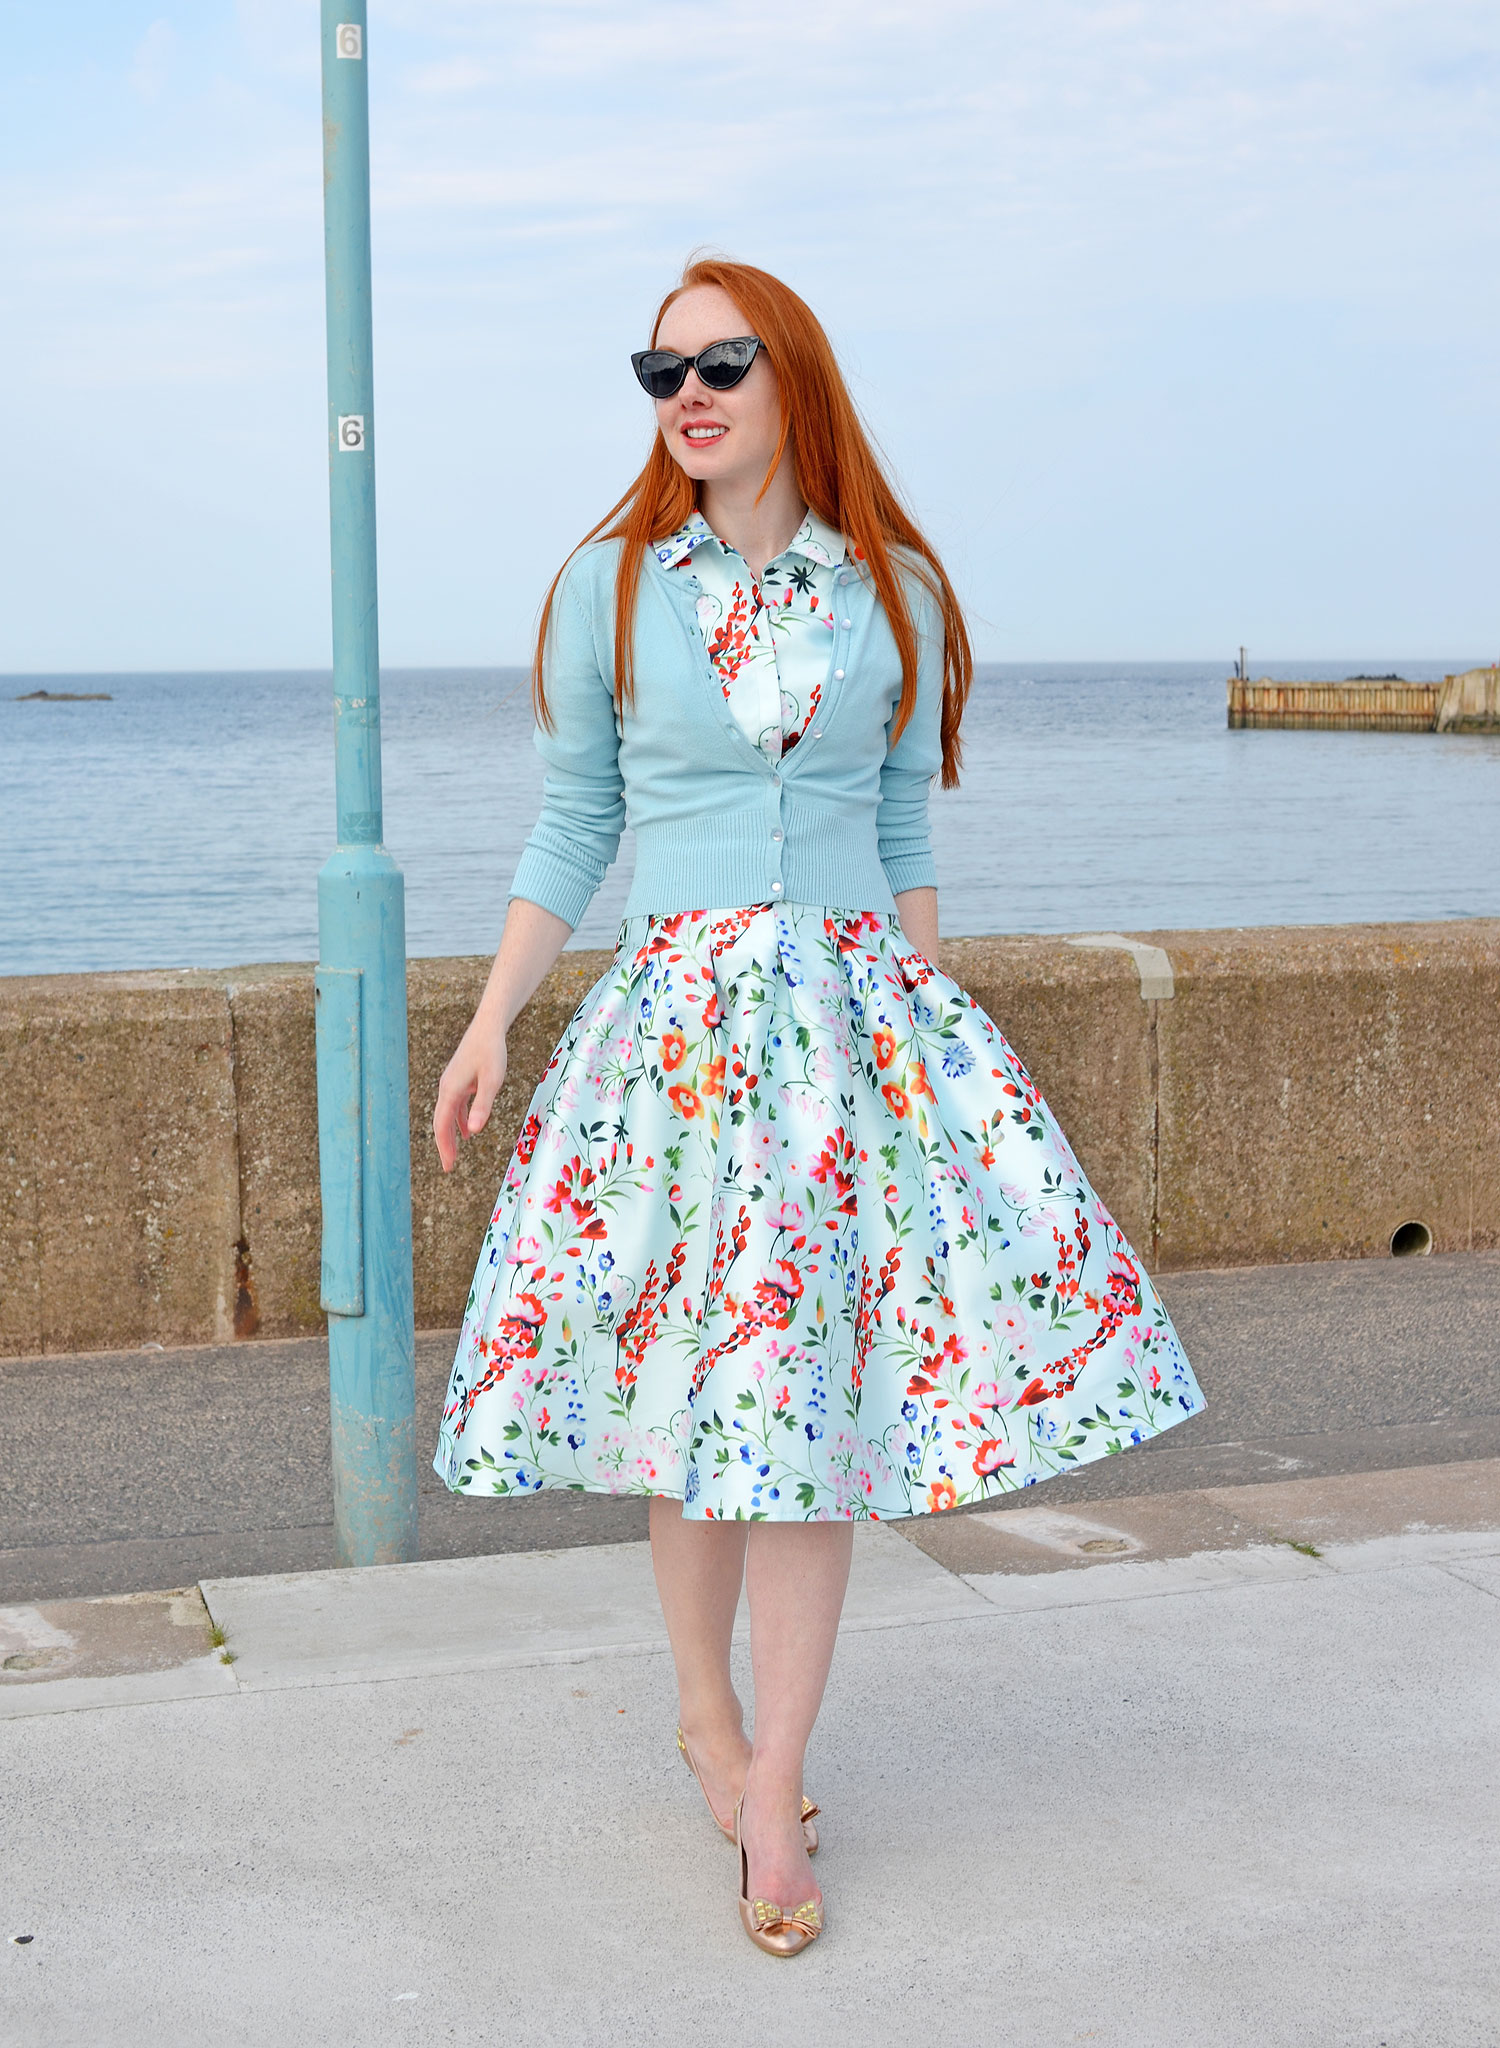 Chi Chi London 'Nora' floral dress worn with blue Hell Bunny cardigan and Kurt Geiger flats